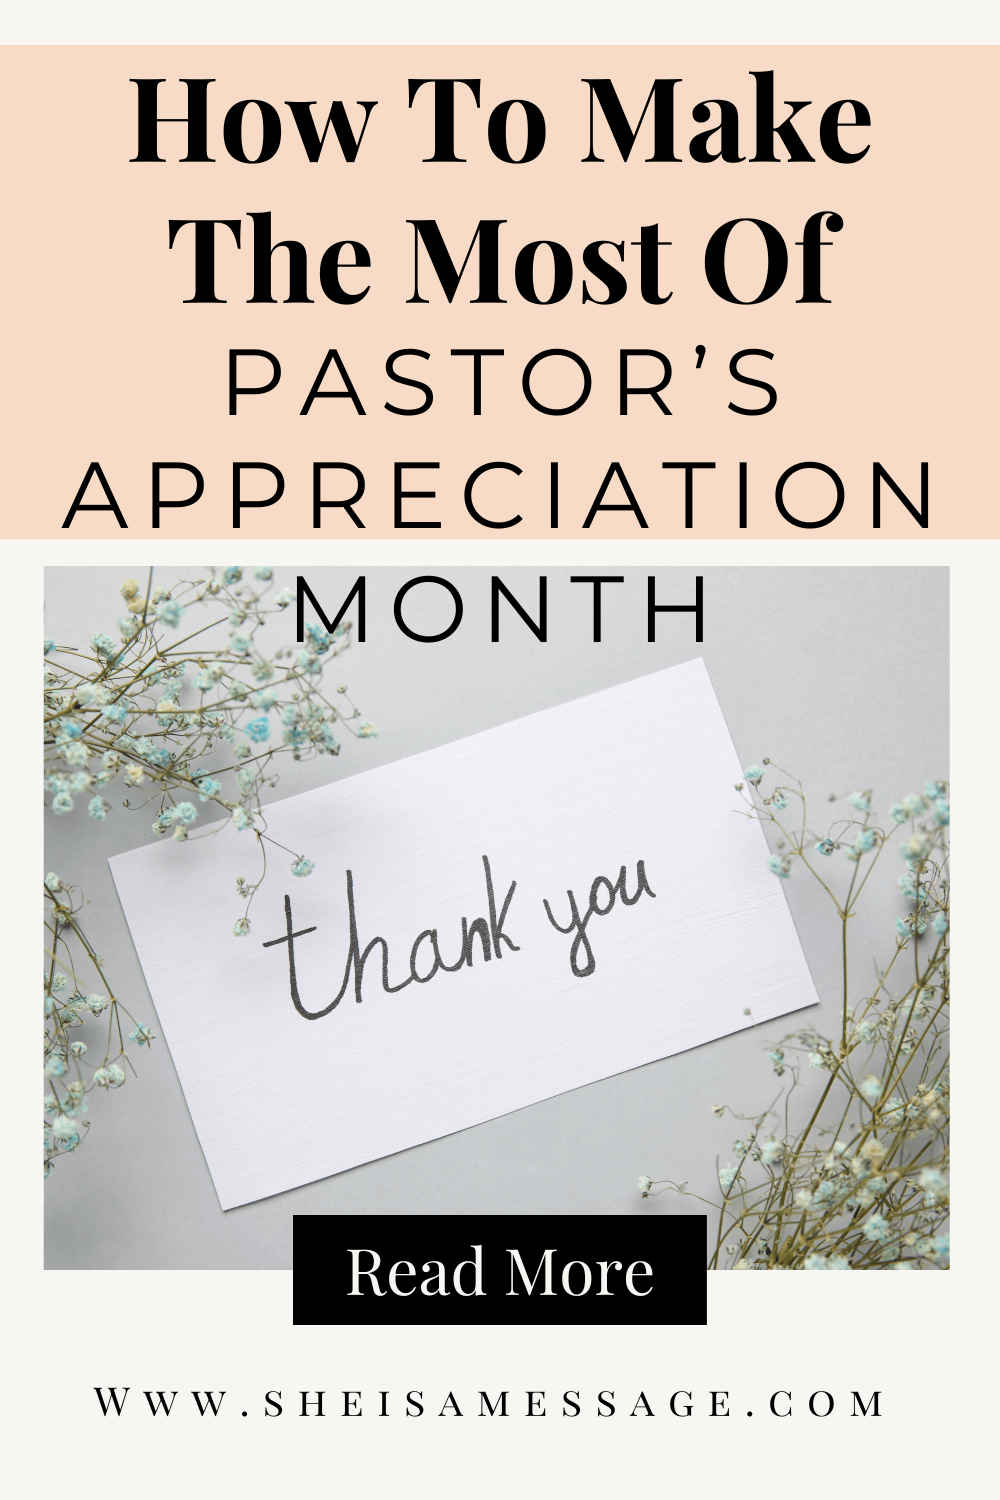 How To Make The Most Of Pastor's Appreciation Month Two